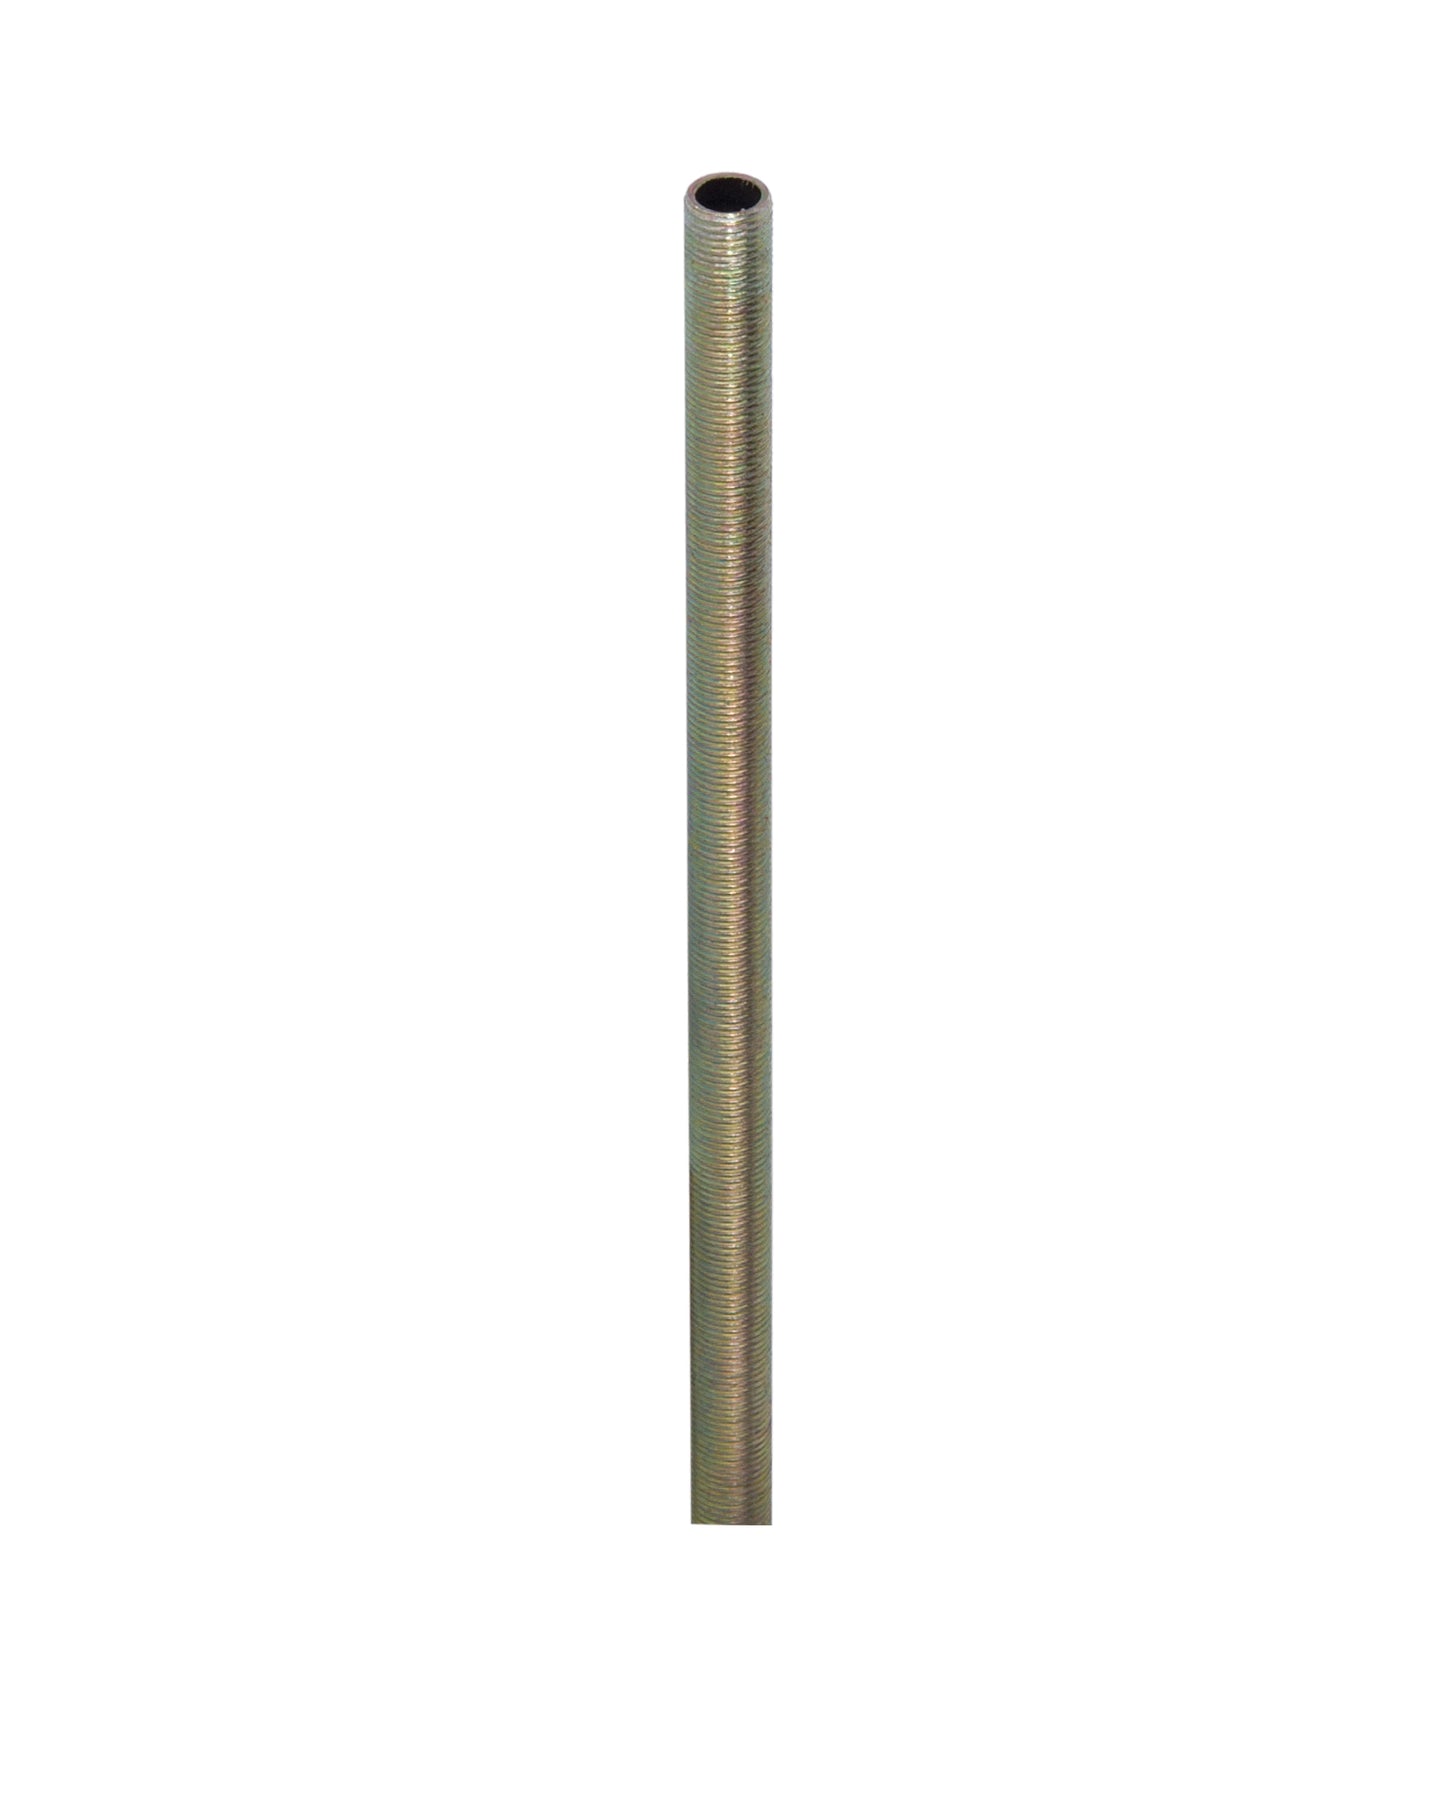 1/8 IP Steel Zinc Plated All Thread Pipe for Lamps - Choice of Length (22390)